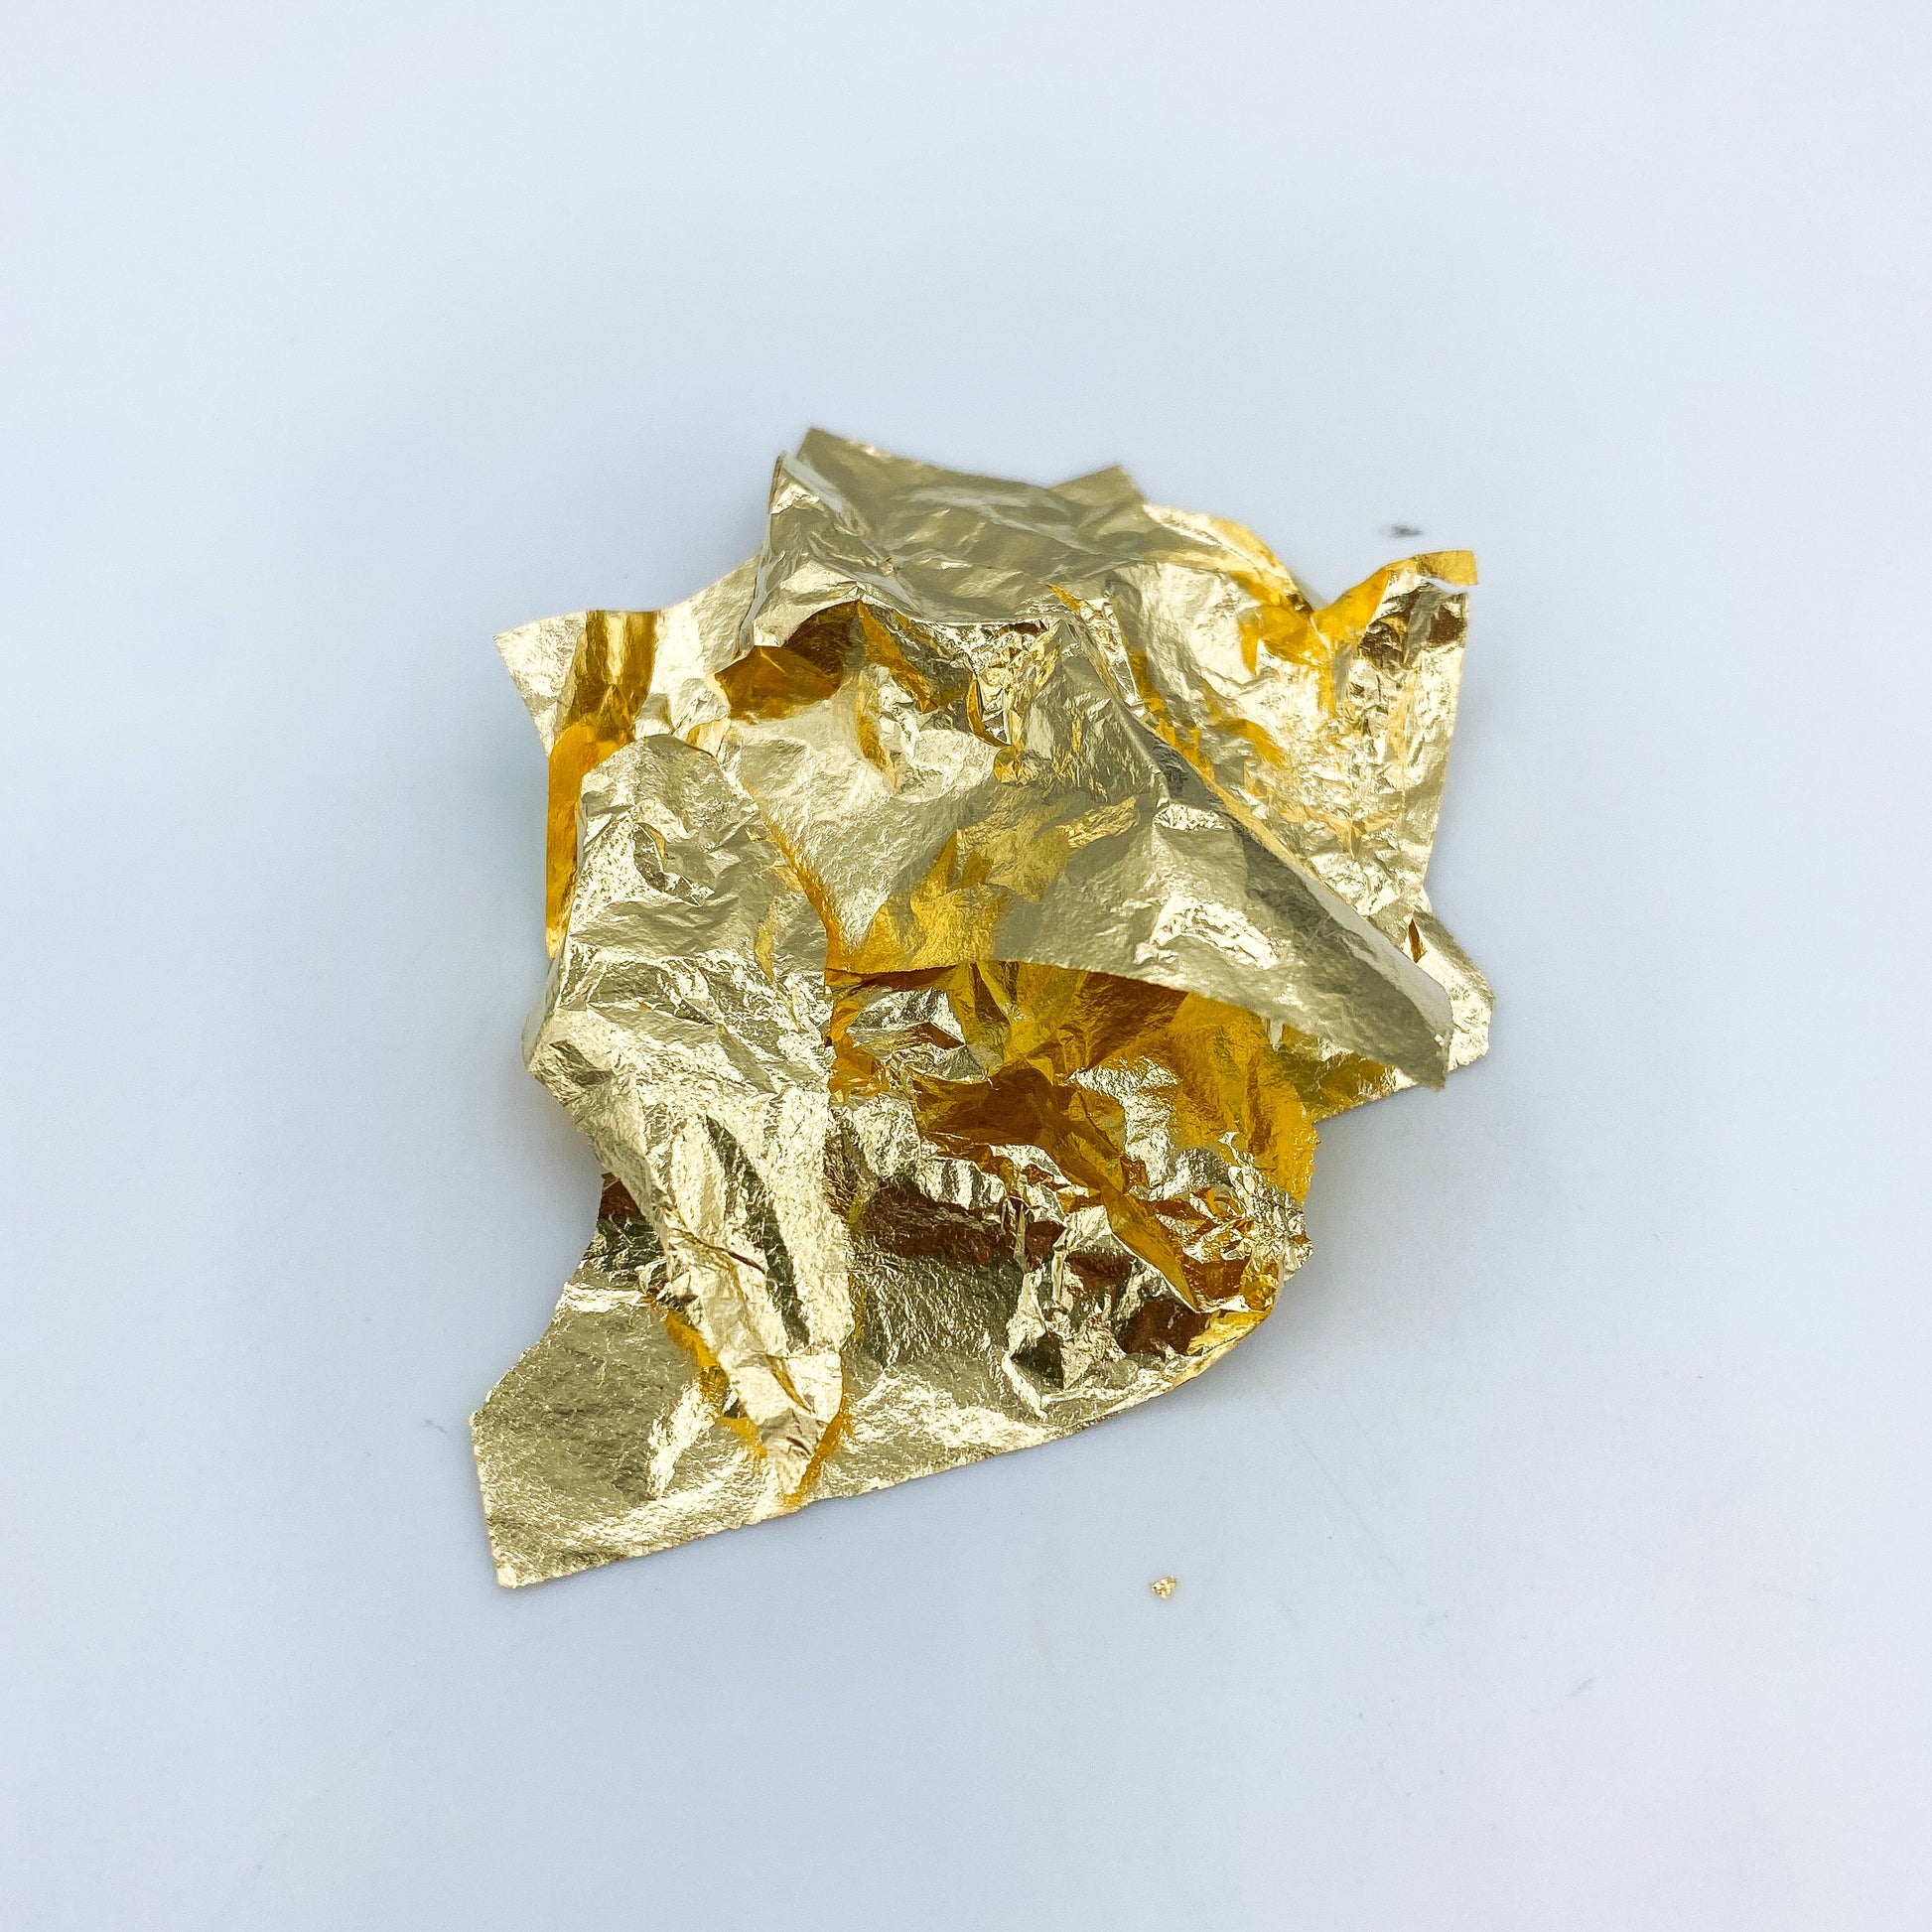 Gold Flakes, Pure Gold Wholesale, Gold Leaf